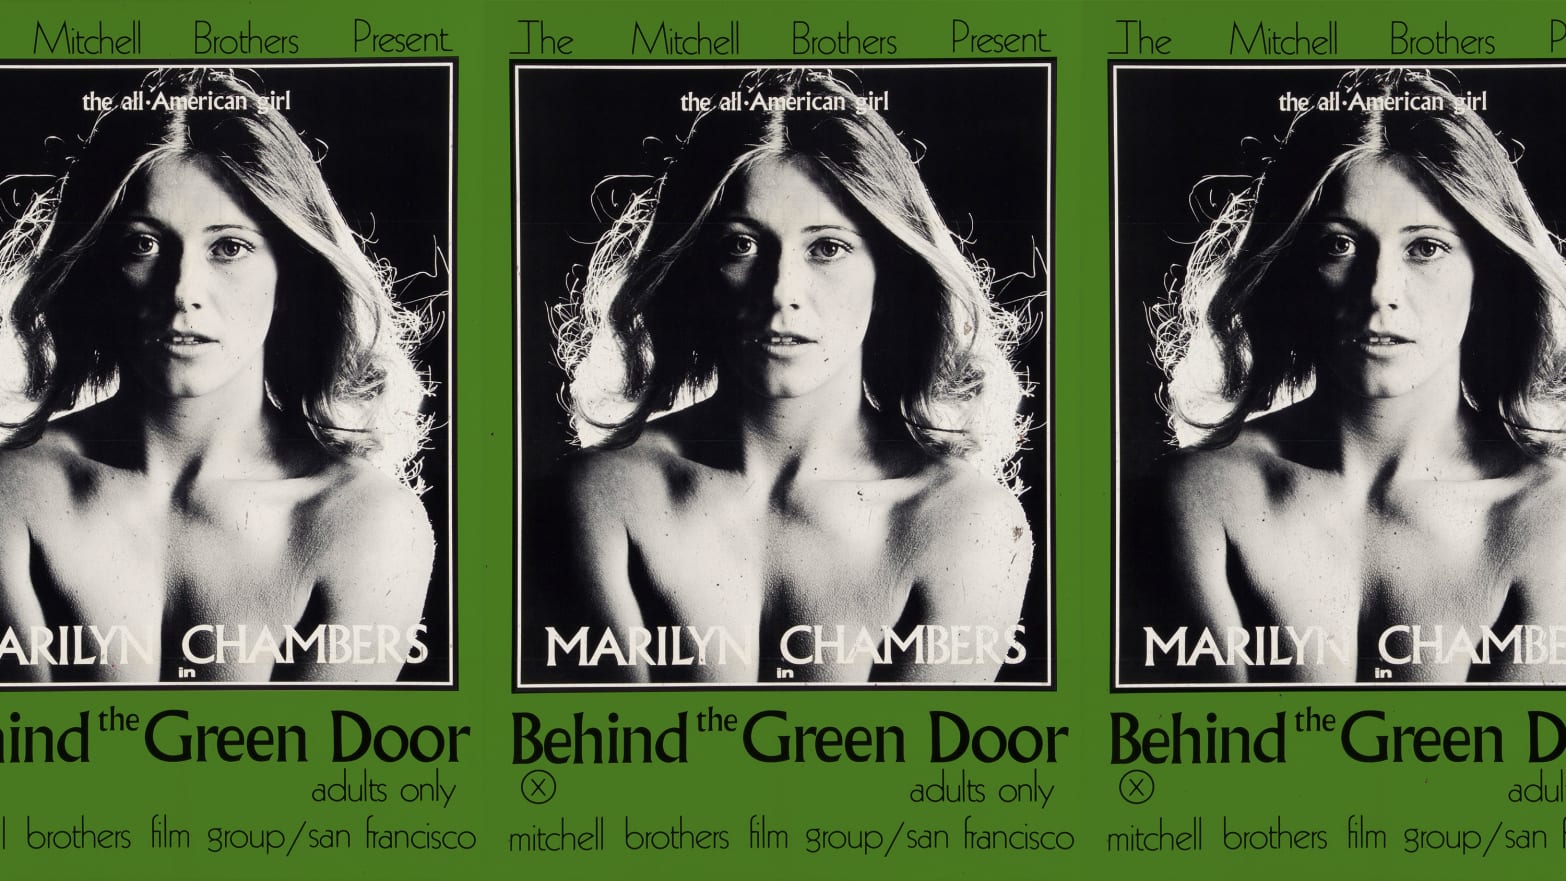 Fifty Years of Behind the Green Door, the Groundbreaking Porn Film That Upset the Supreme Court